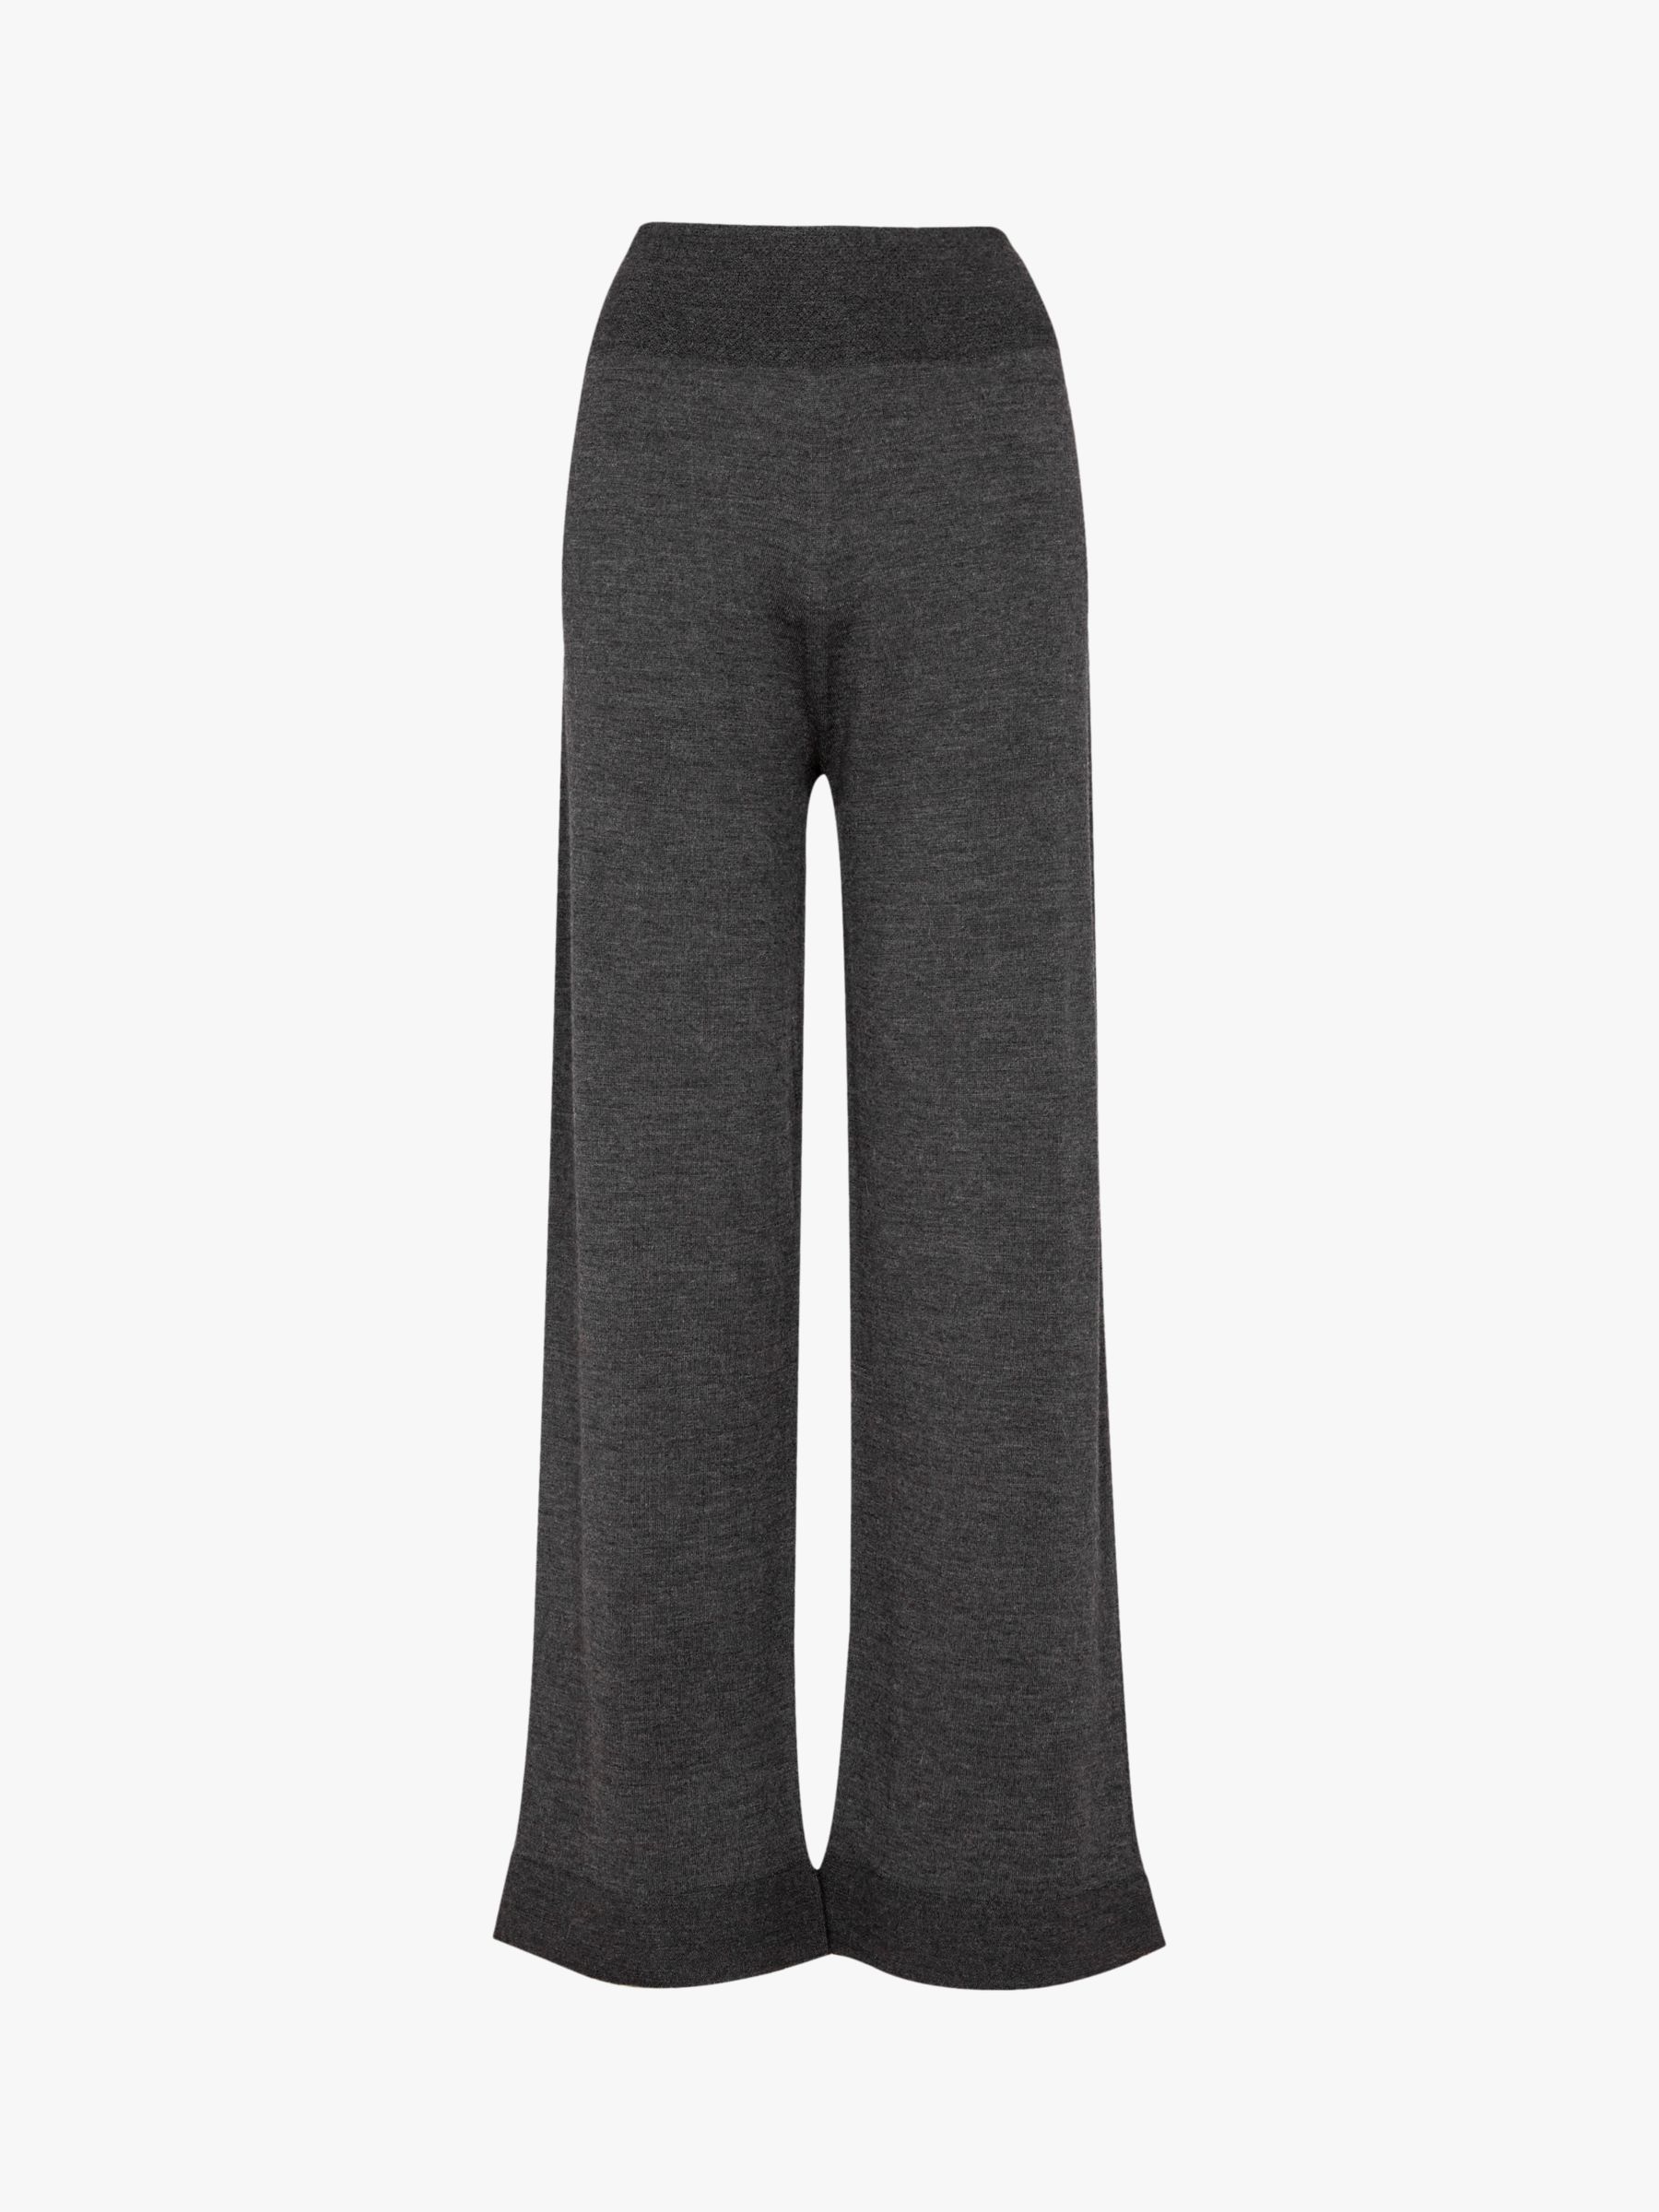 Buy Celtic & Co. Wool Lounge Trousers Online at johnlewis.com